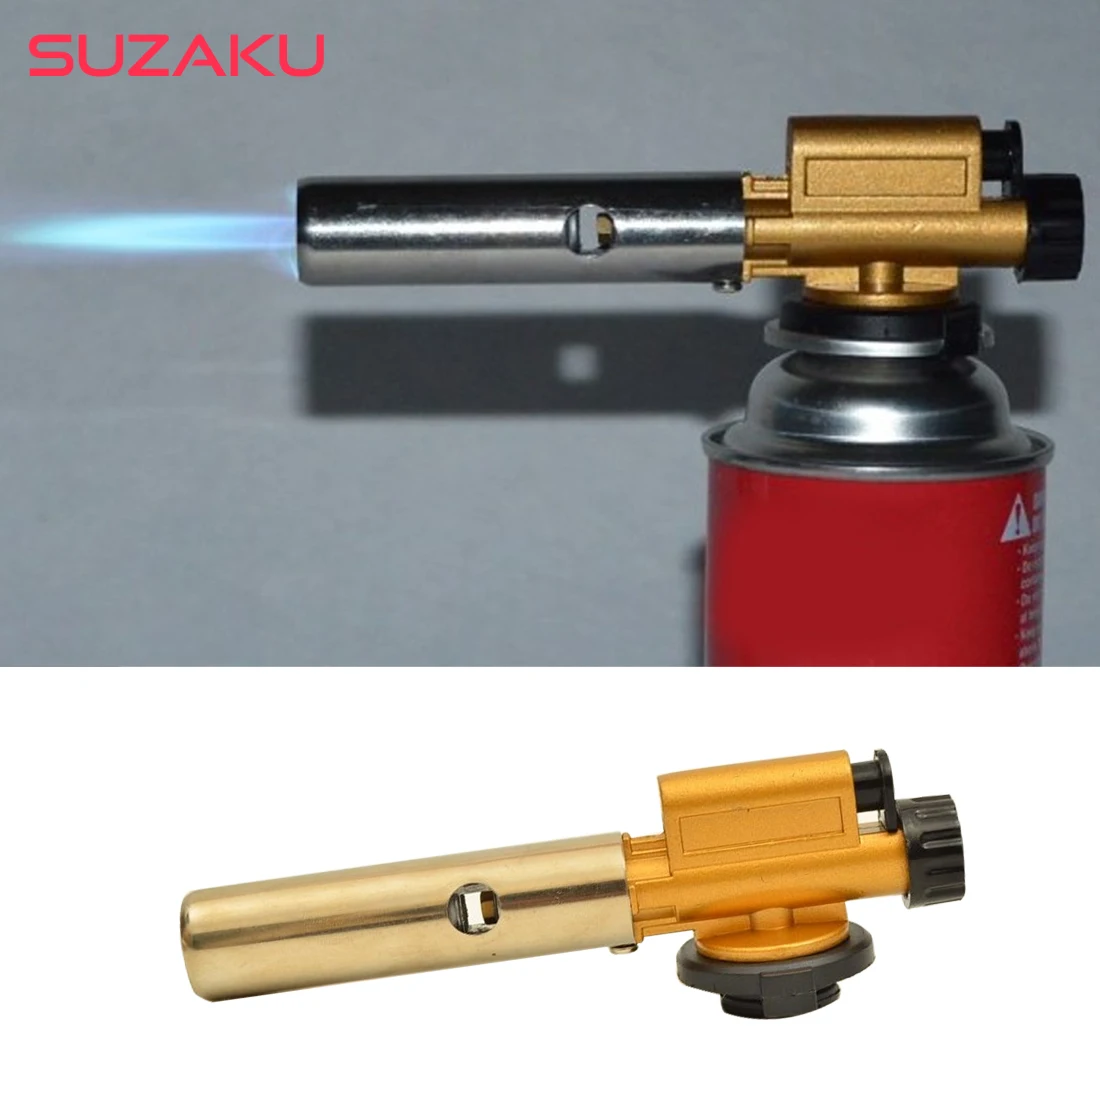 

803 Metal Electronic Ignition Copper Flame Gun Butane Gas Burners Maker Torch Lighter For Outdoor Camping Picnic Cooking Welding